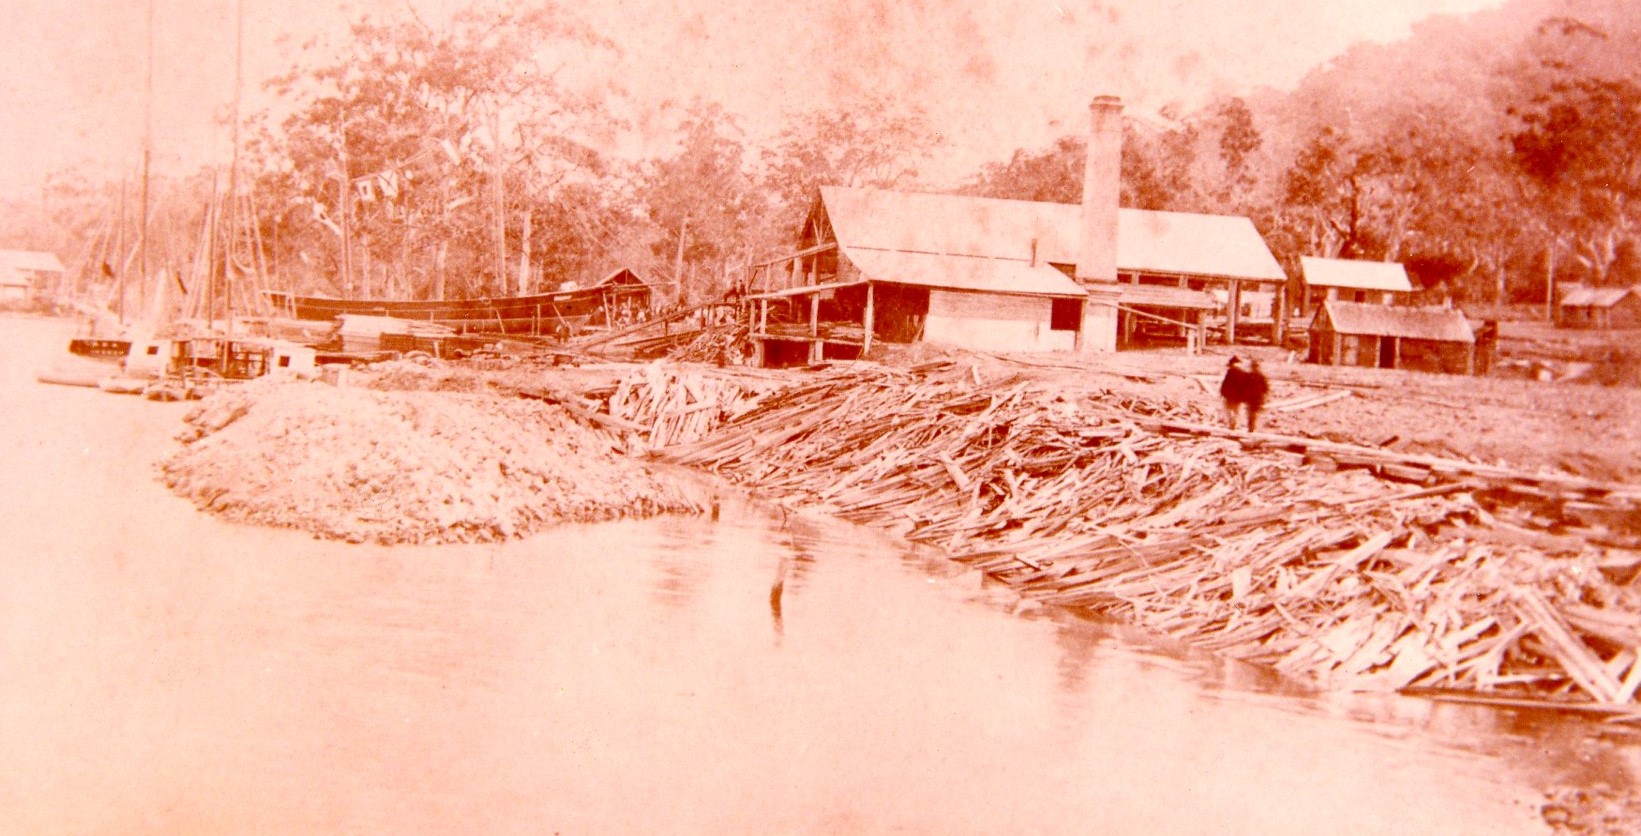 A sepia image of the timber mill owned and operated by Joseph Laurie in Laurieton taken in 1886. Two men can be seen walking along the bank and the ship “Our Elsie” sits in the slipway behind the building.